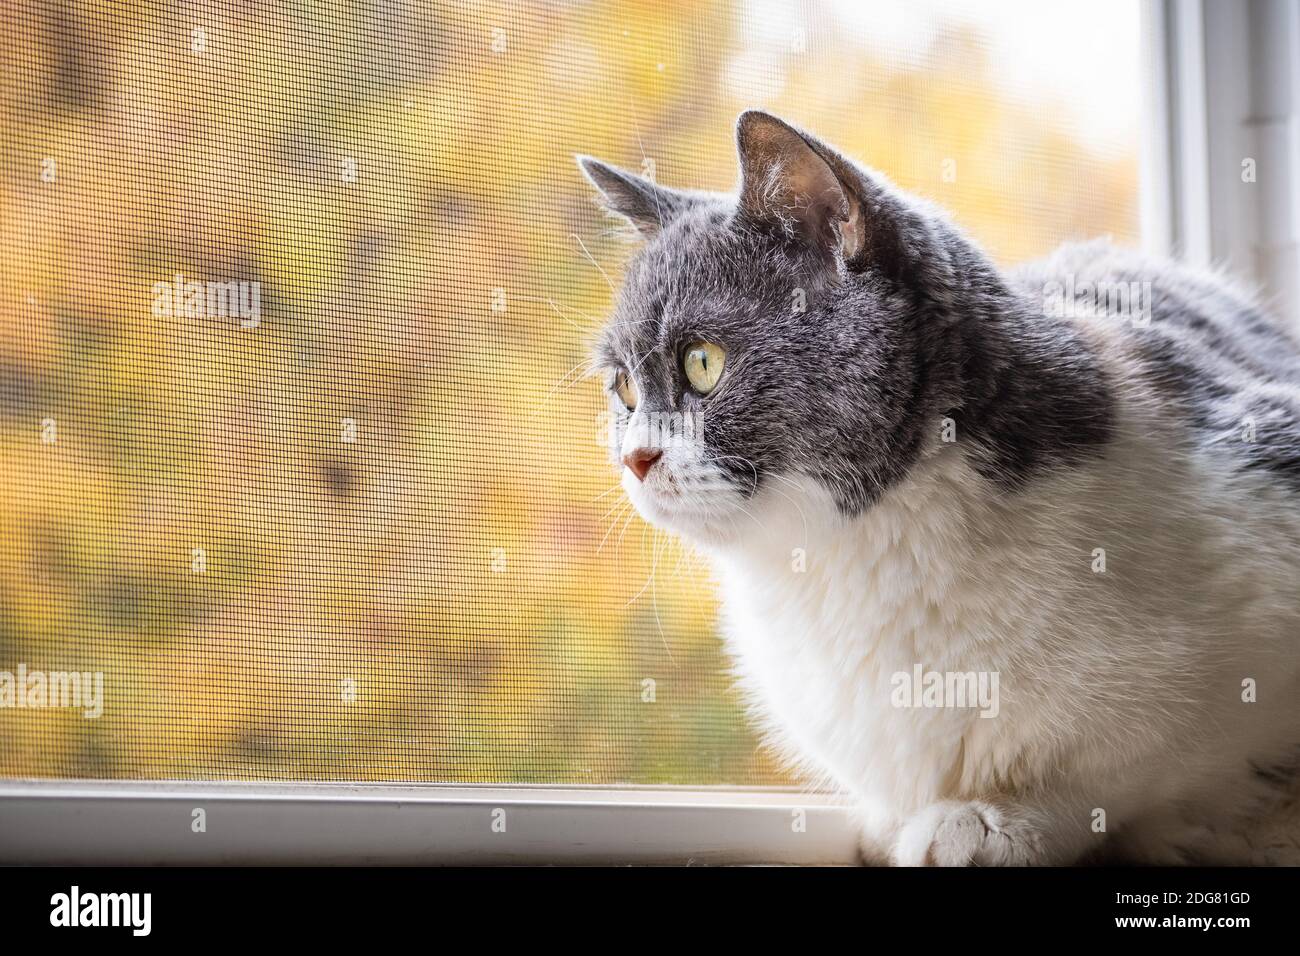 Close up of small gray and white cat with green eyes sitting on the windowsill and looking curiously outside; fall foliage visible outside, behind the Stock Photo